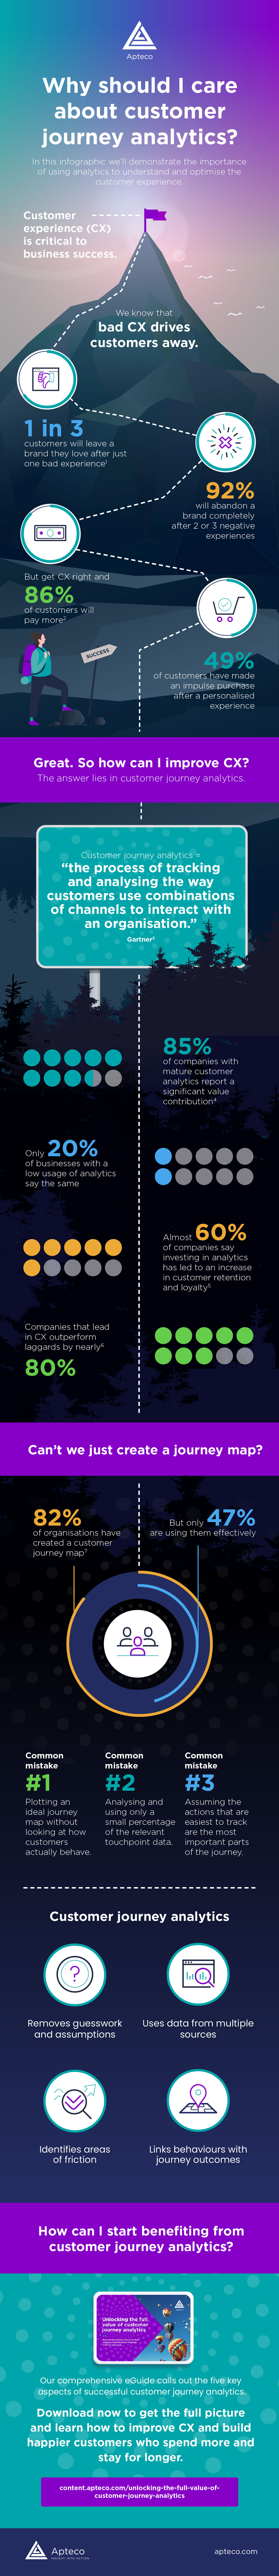 Infographic: Why should I care about customer journey analytics?